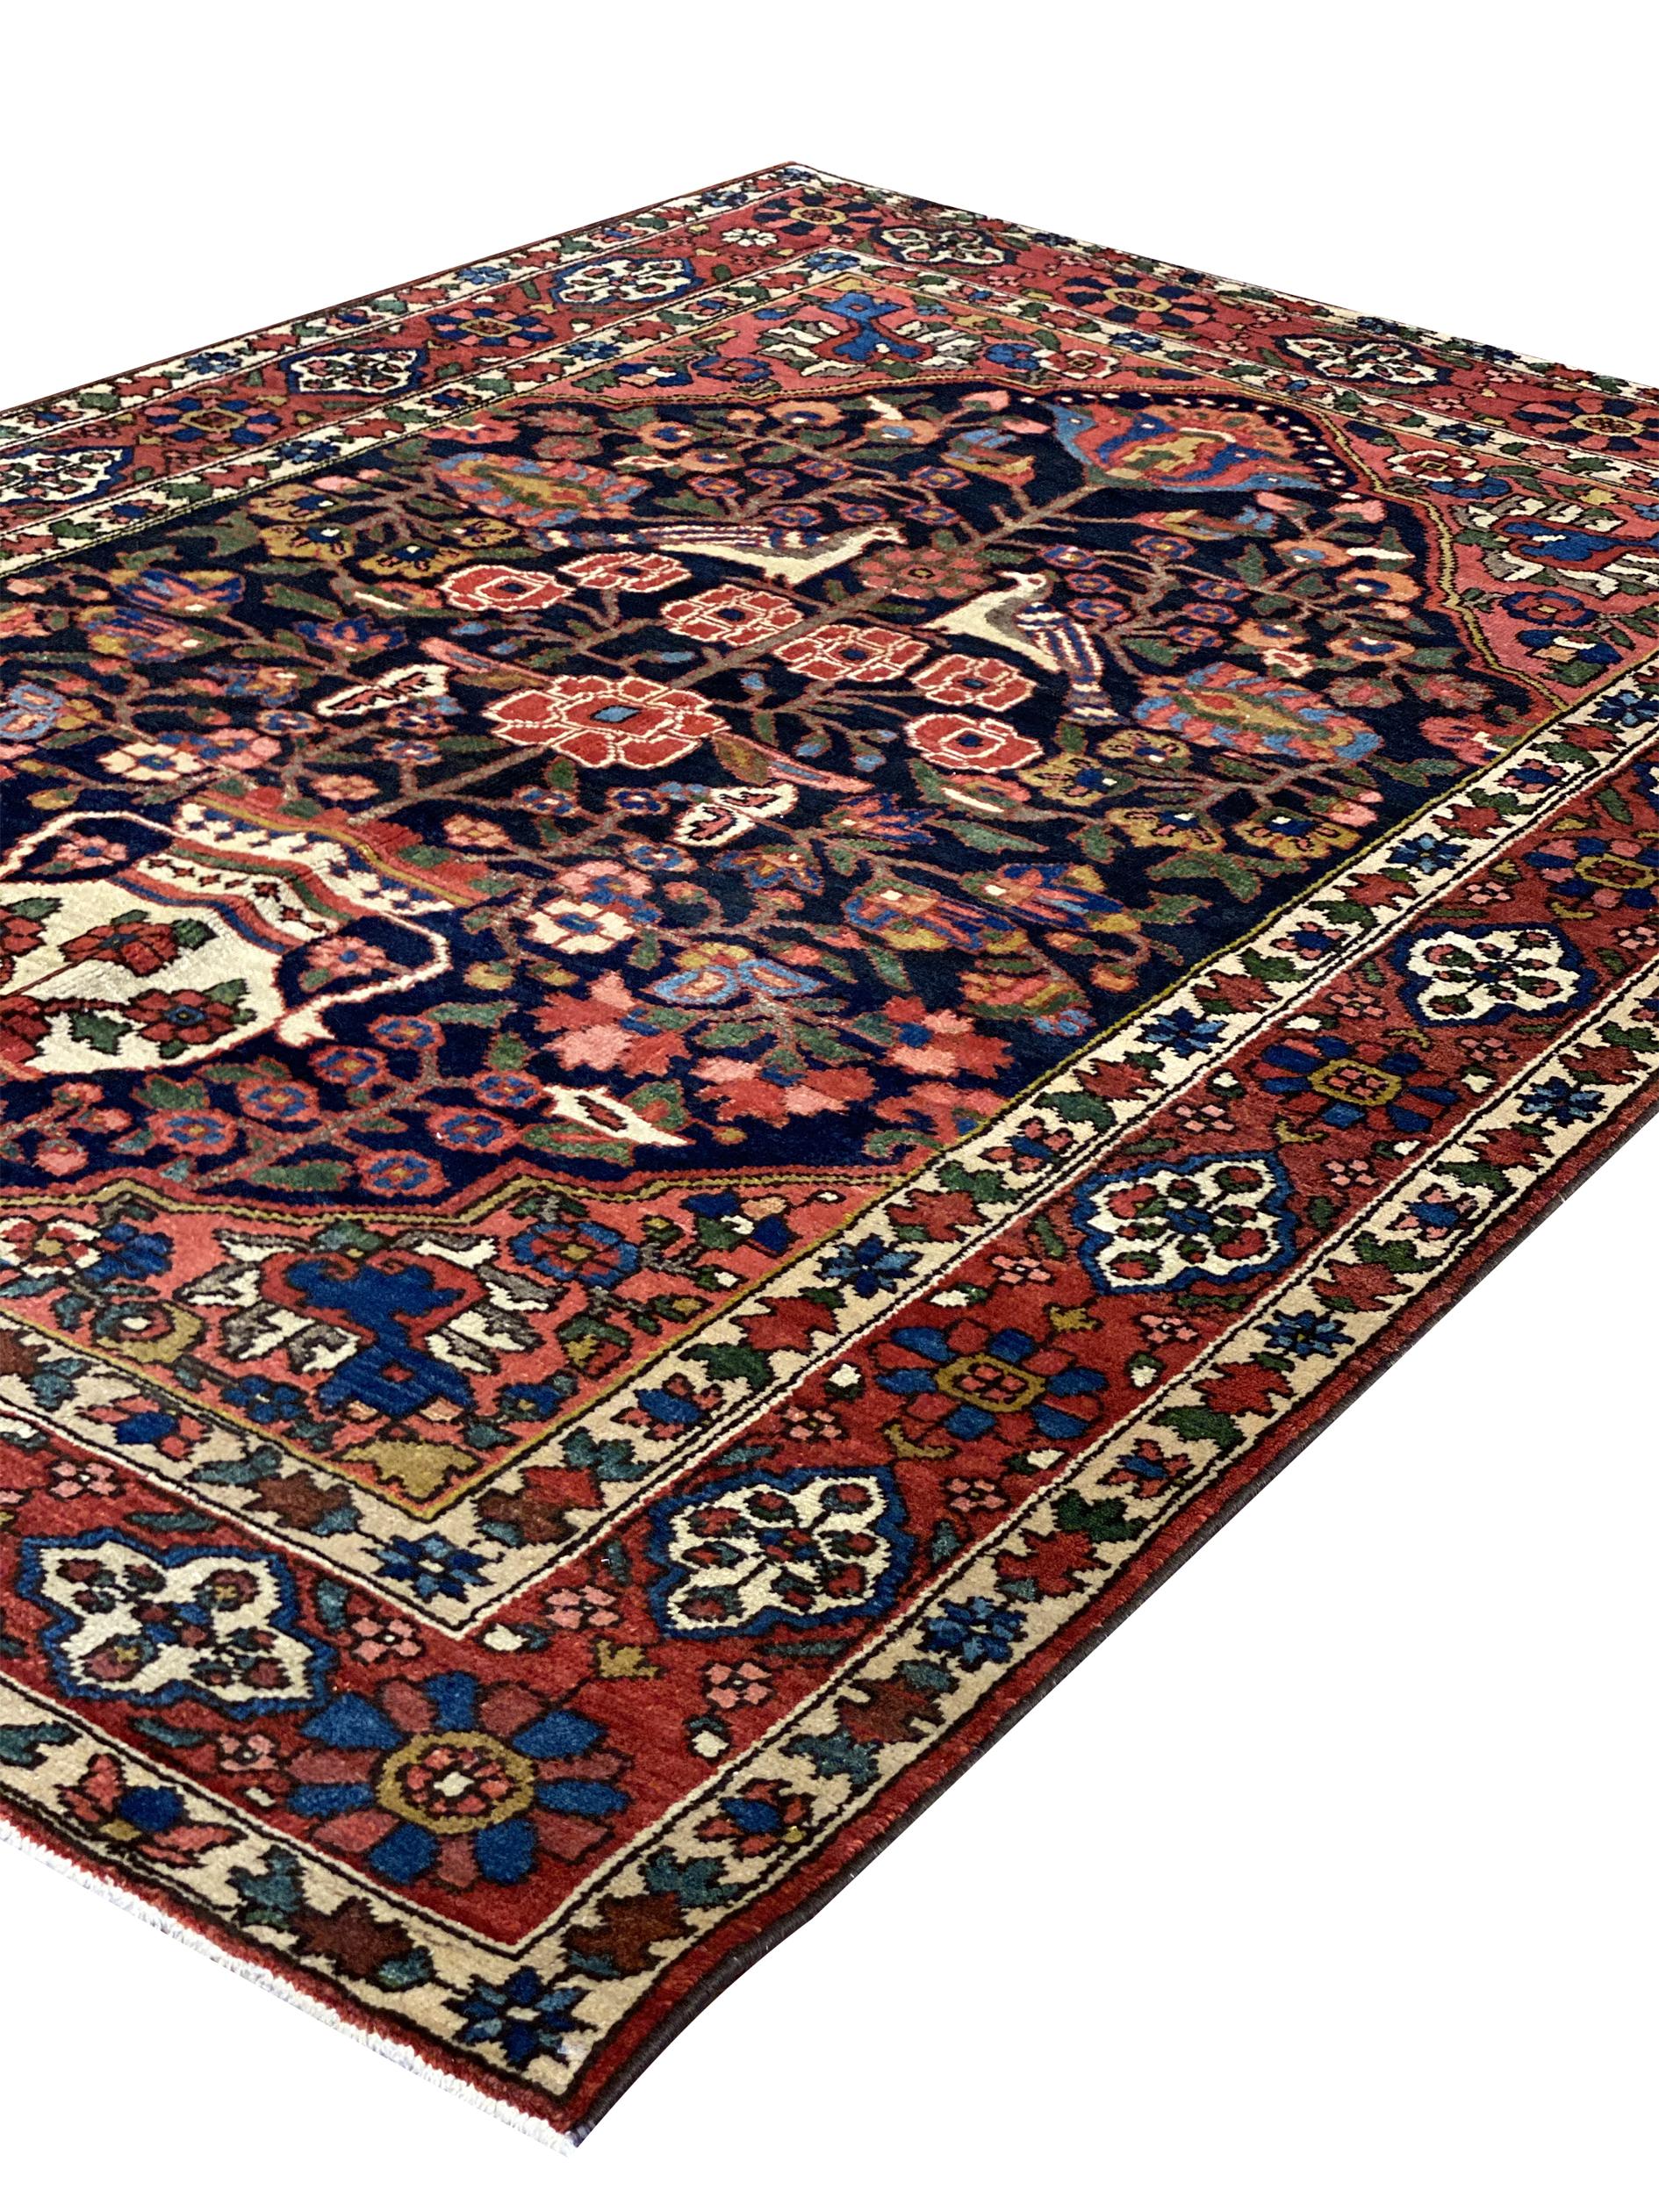 Bakhtiari rugs are among the most durable and have a vast array of designs among Persian tribal rugs. Bakhtiar region has numerous tribes with each tribe having its own technique of weave. Their antique rugs were almost exclusively woven for their